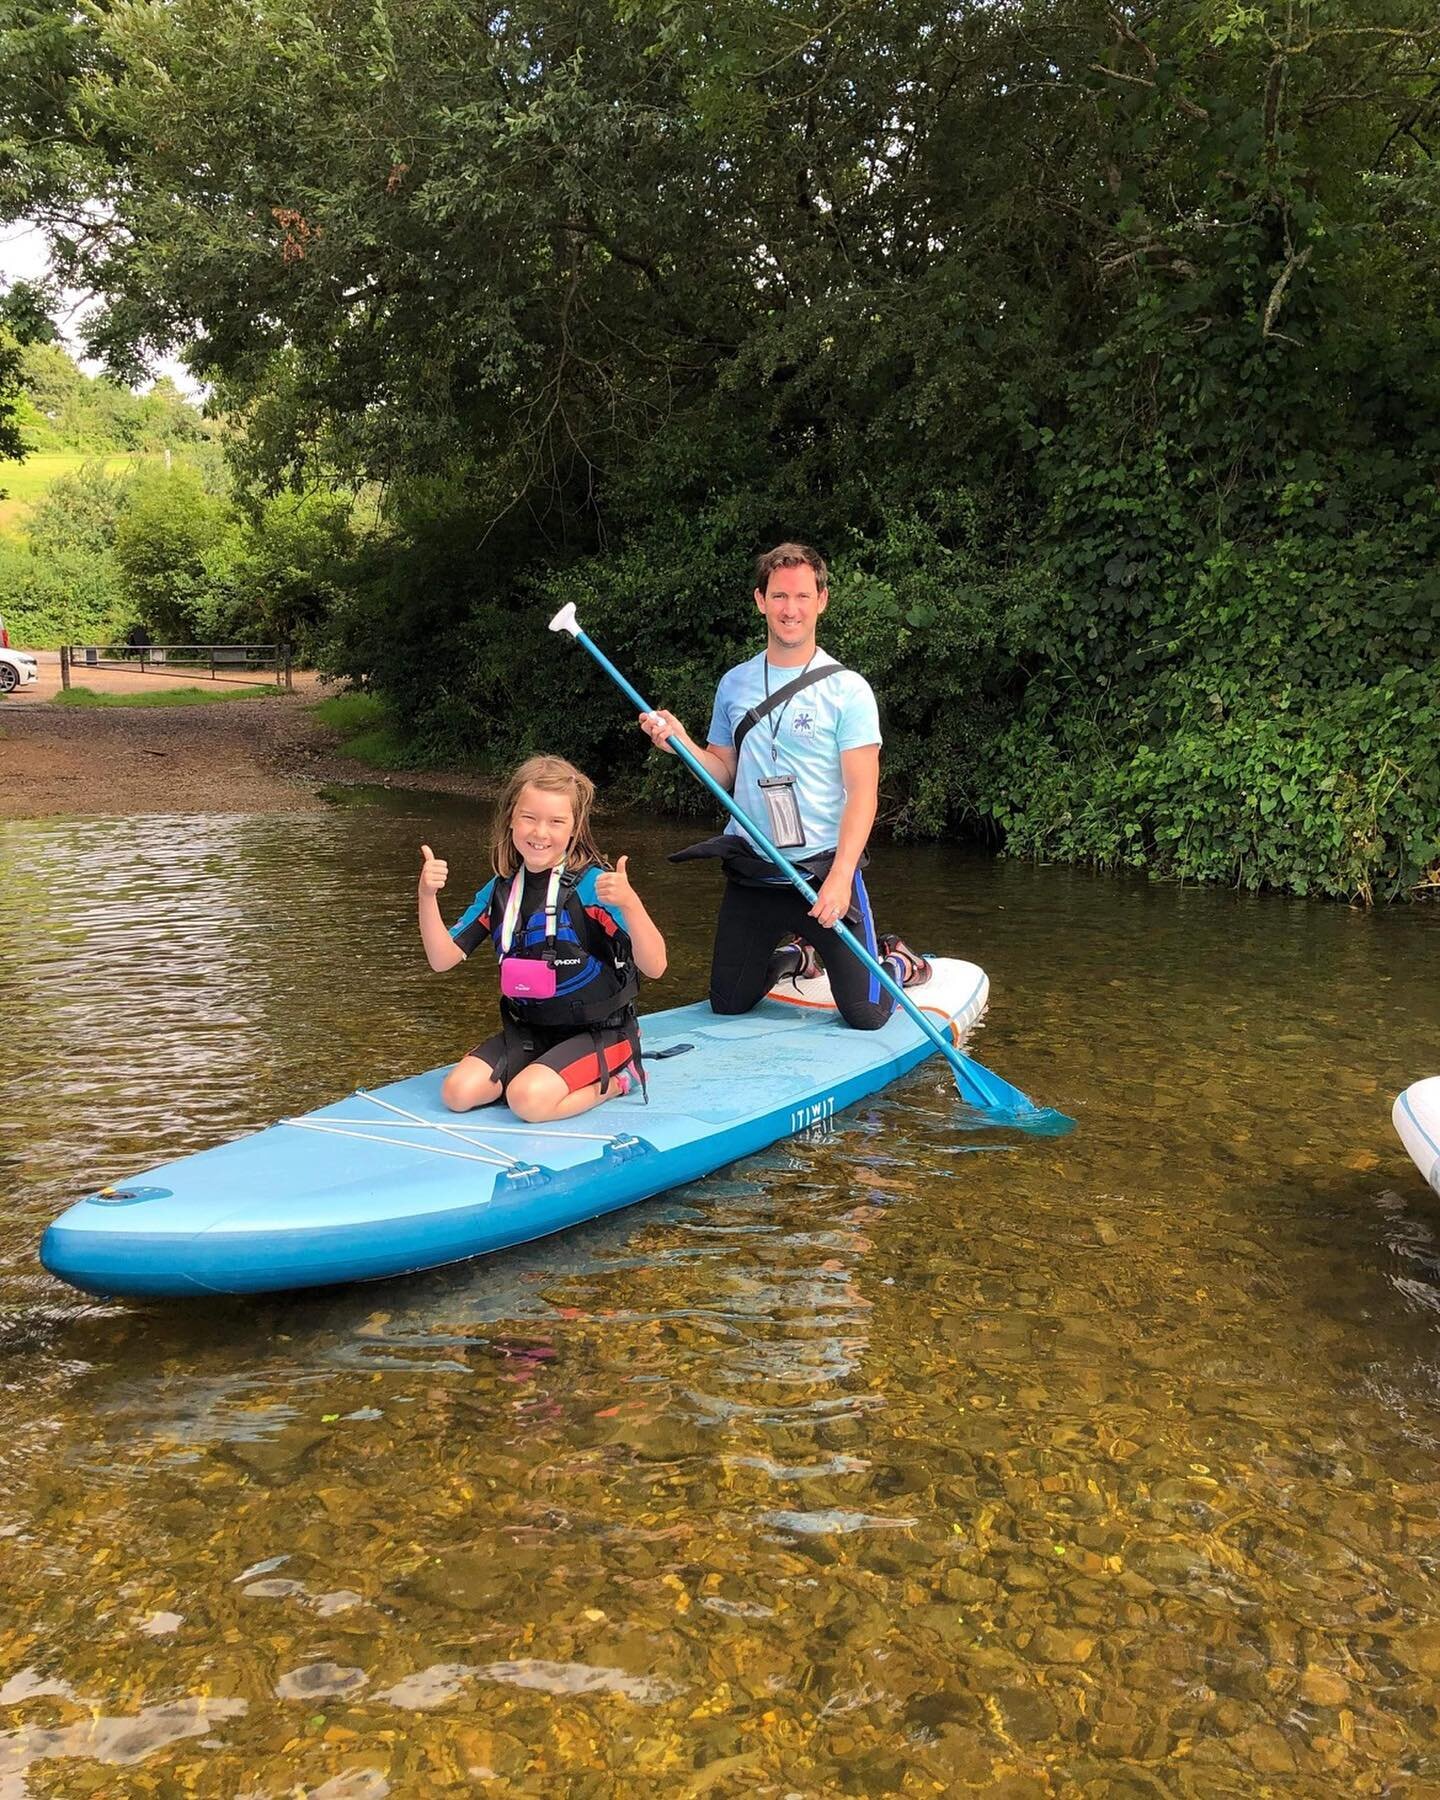 SUMMER HOLIDAYS is nearly upon us.

What's your plans to keep the kids away from those ipad and XBox screens? 📱💻🎮

We've got Paddleboards and life jackets to suit all ages or a 2/3 person stable Kayak that all ages would love.

Head down to the be